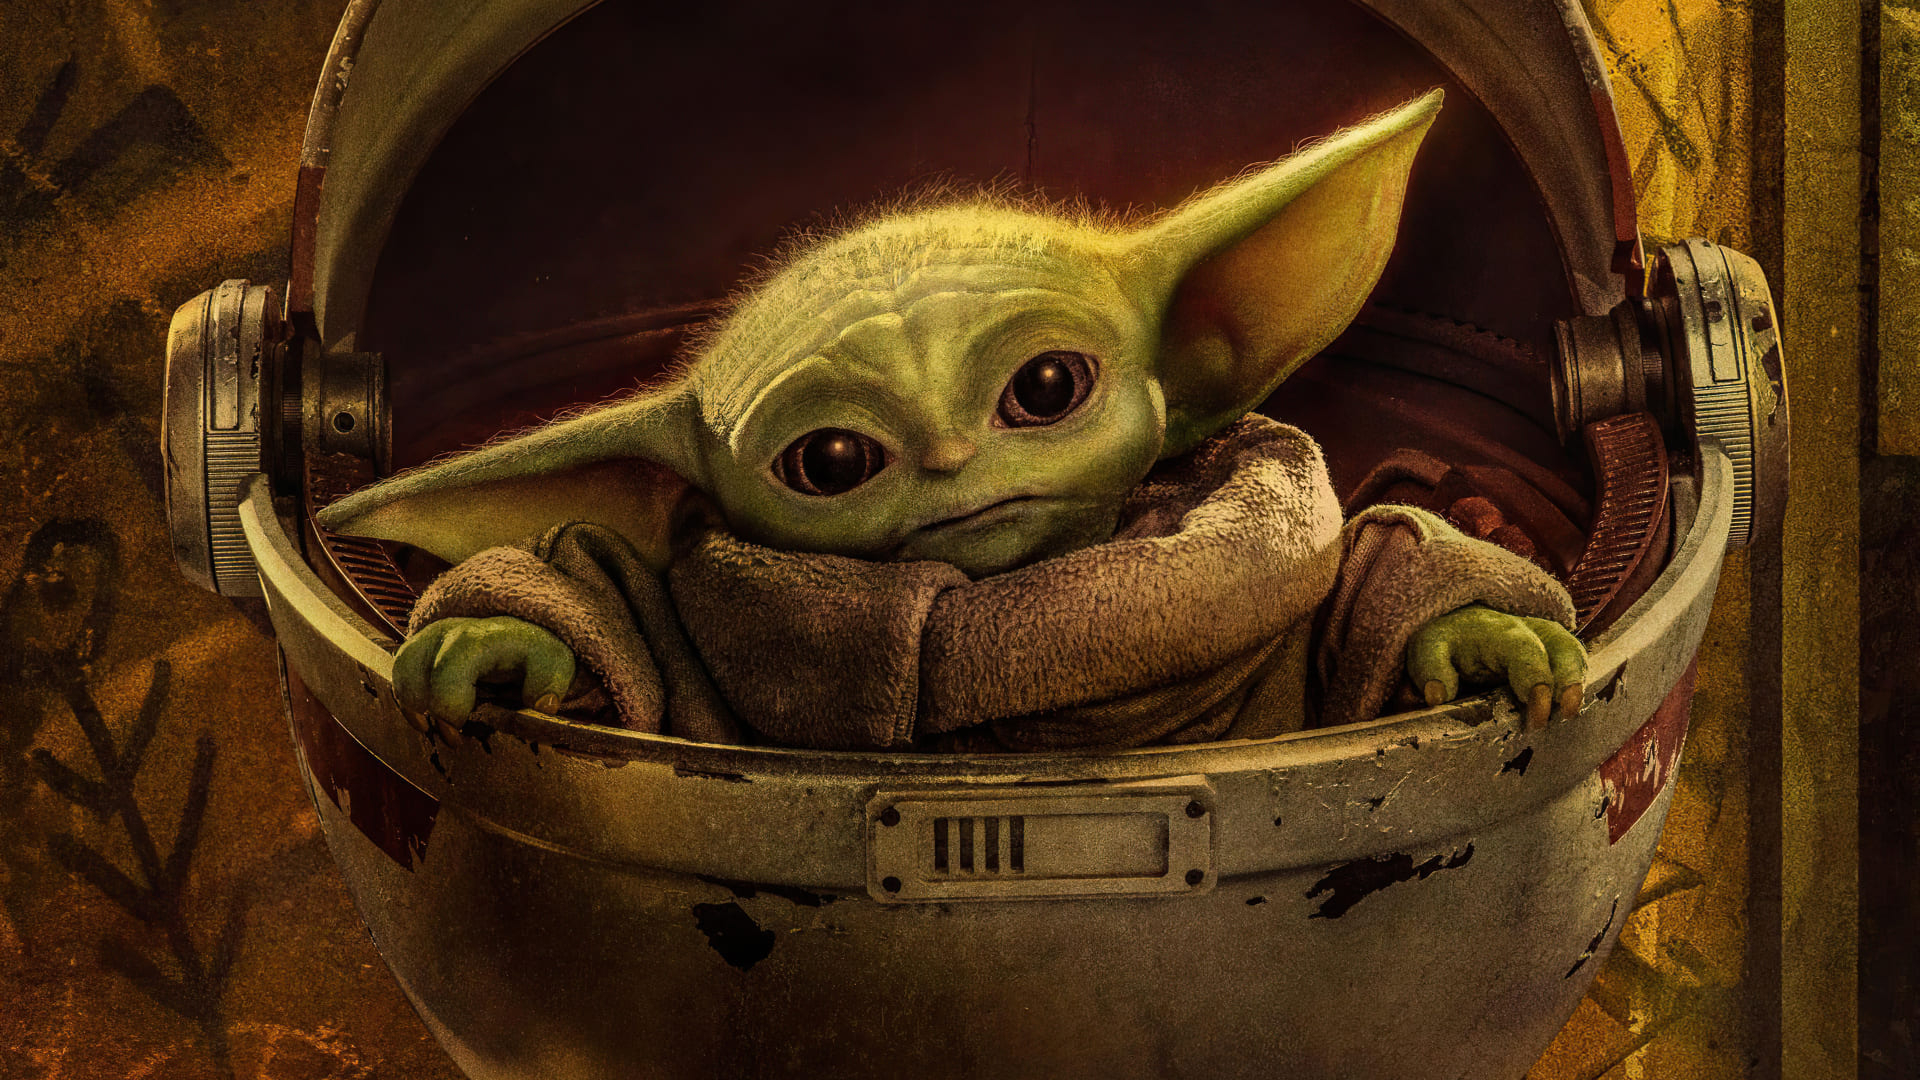 1920x1080 Baby Yoda Wallpapers : Top Free Baby Yoda Backgrounds, Pictures \u0026 Images Download